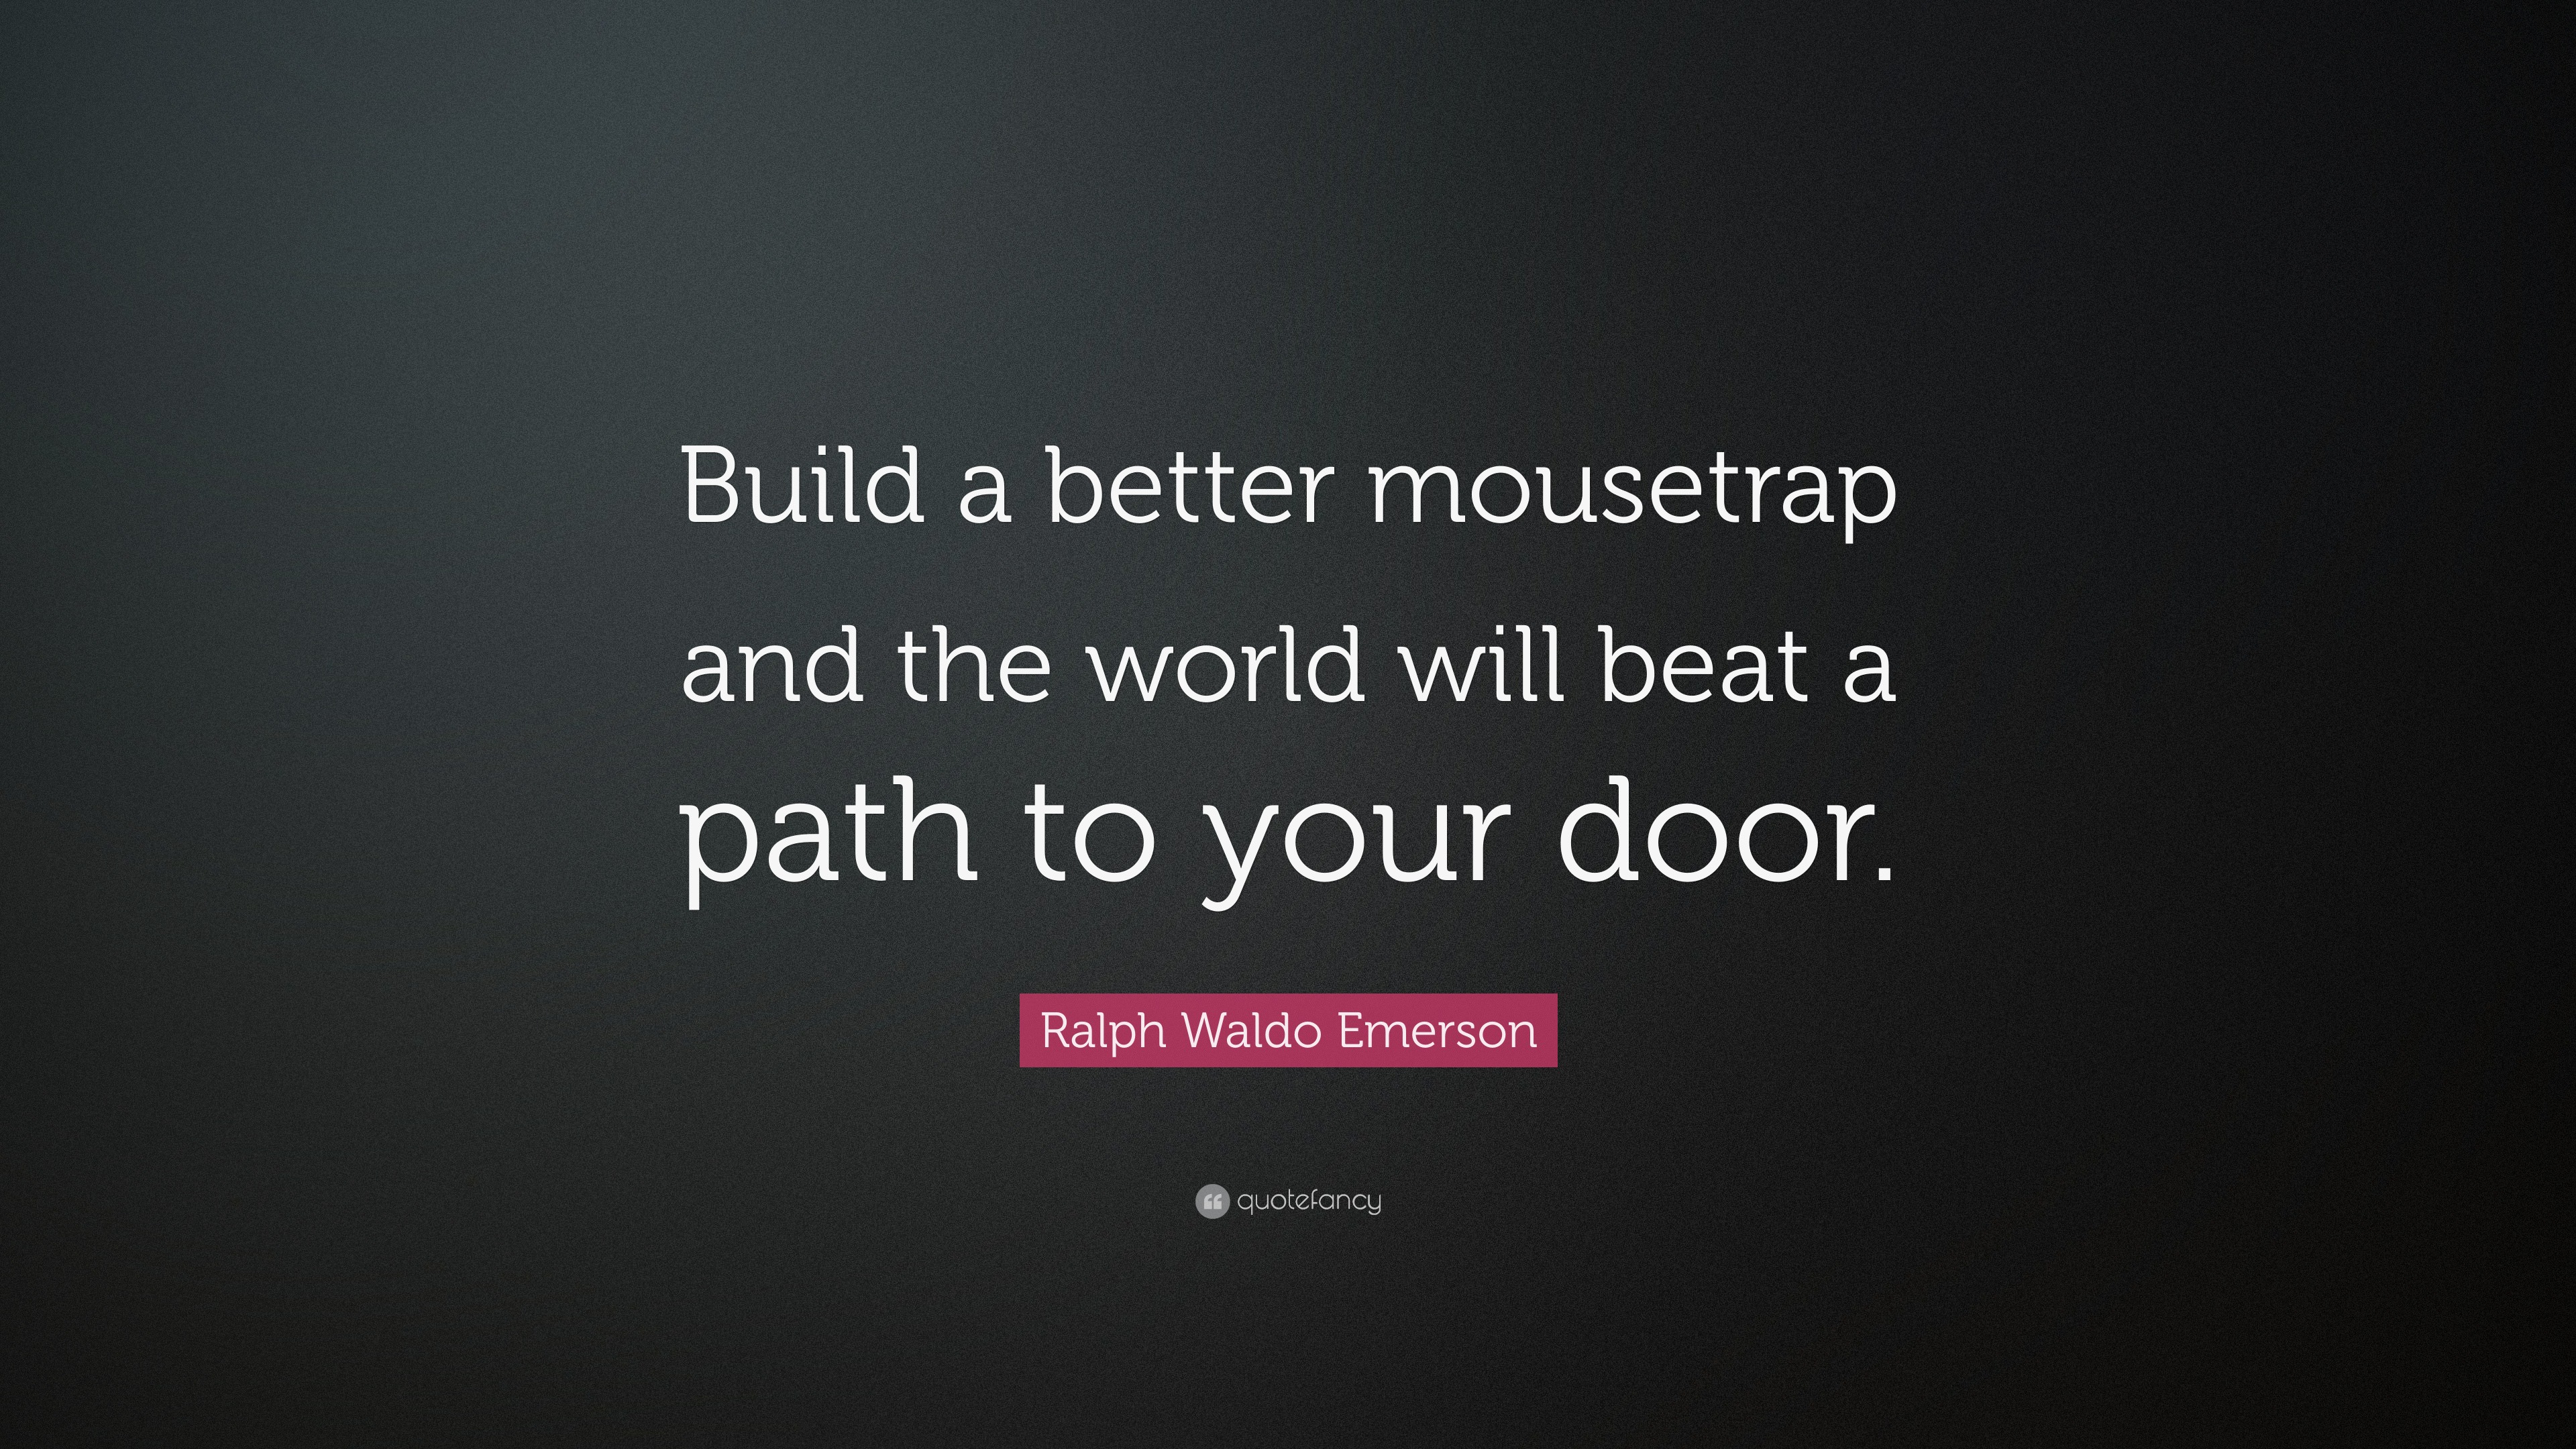 https://quotefancy.com/media/wallpaper/3840x2160/2302007-Ralph-Waldo-Emerson-Quote-Build-a-better-mousetrap-and-the-world.jpg